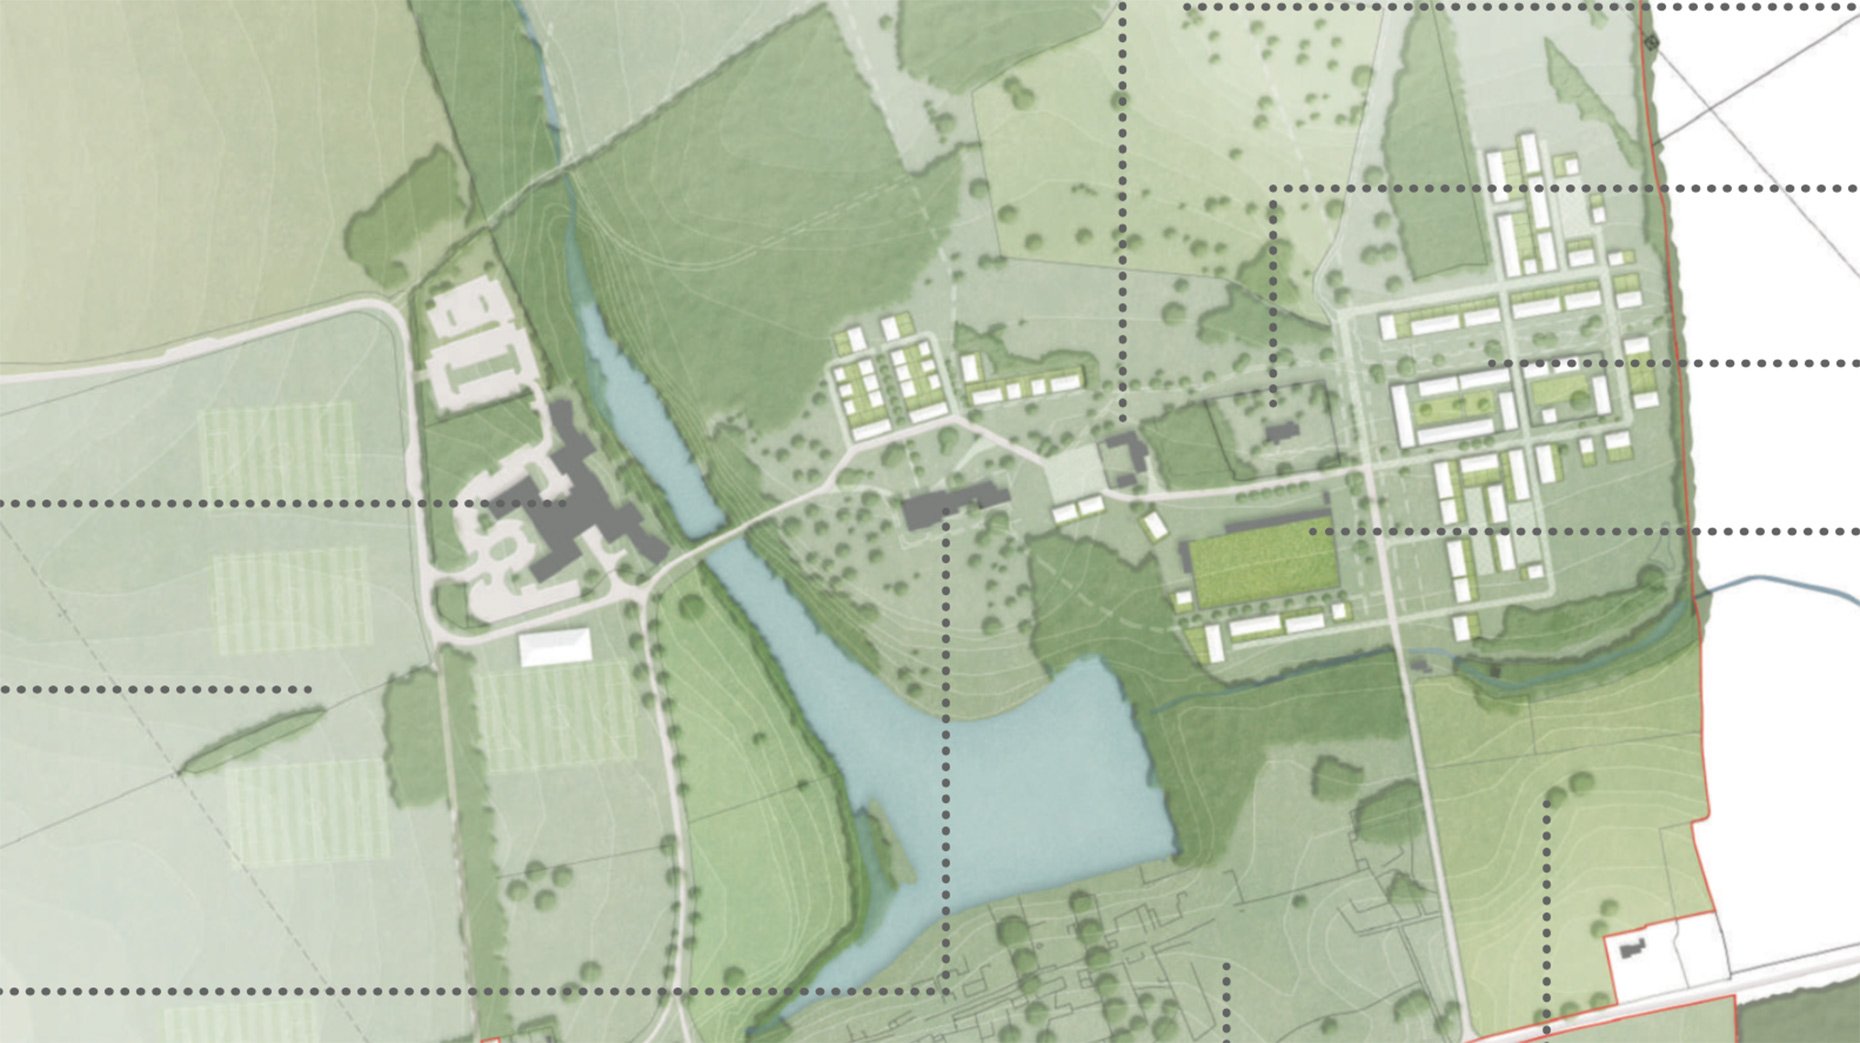 The latest Riseholme development plans submitted by the University  of Lincoln